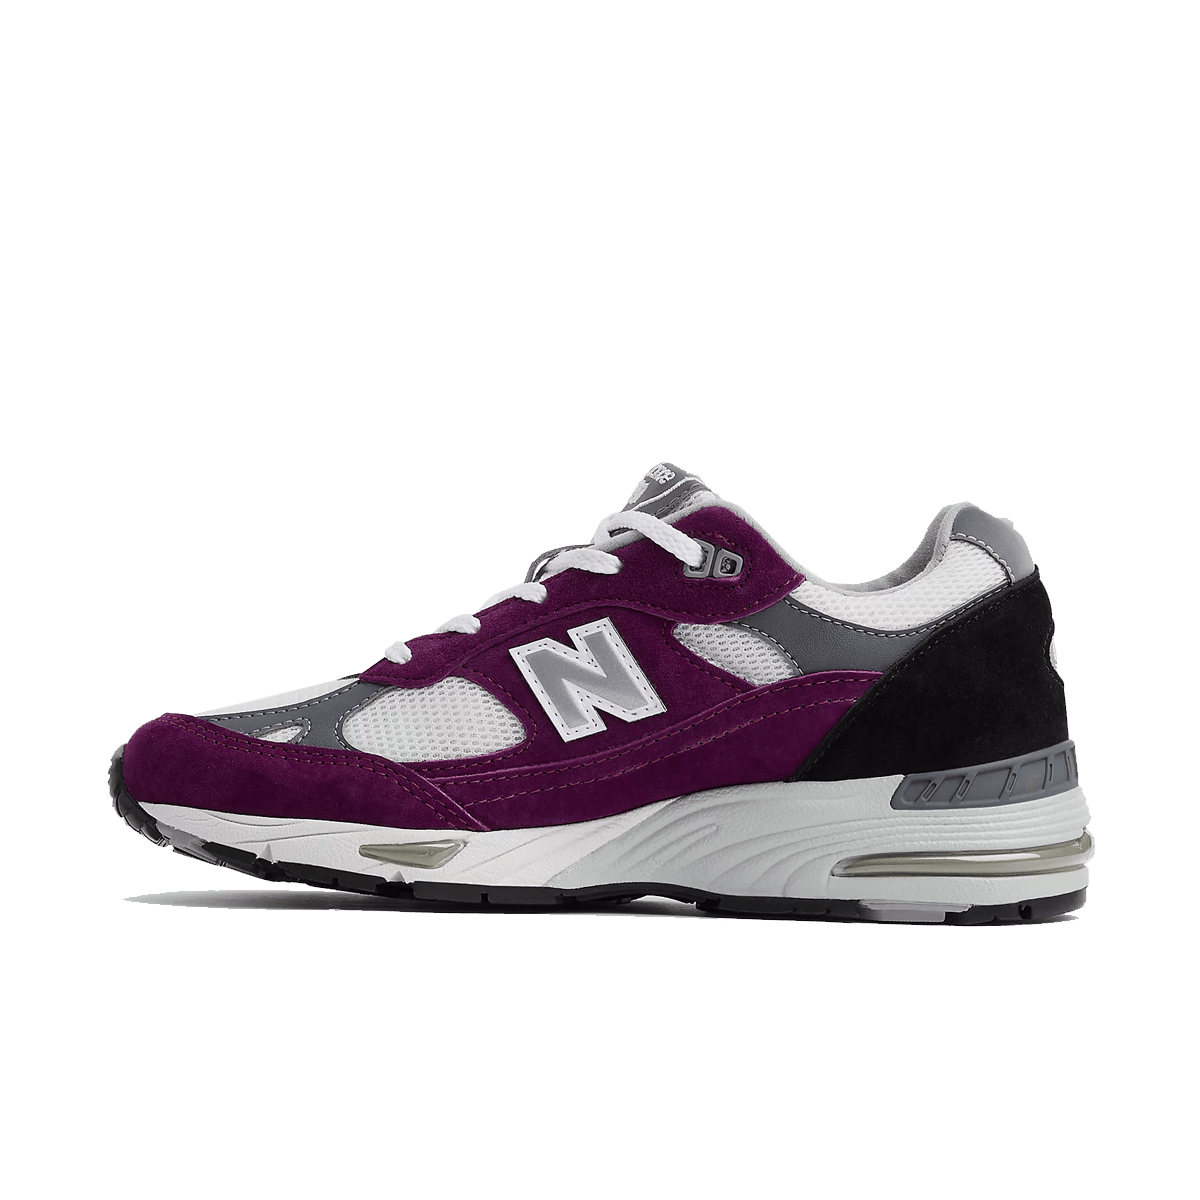 New Balance 991v1 WMNS 'Grape Juice' - Made in UK